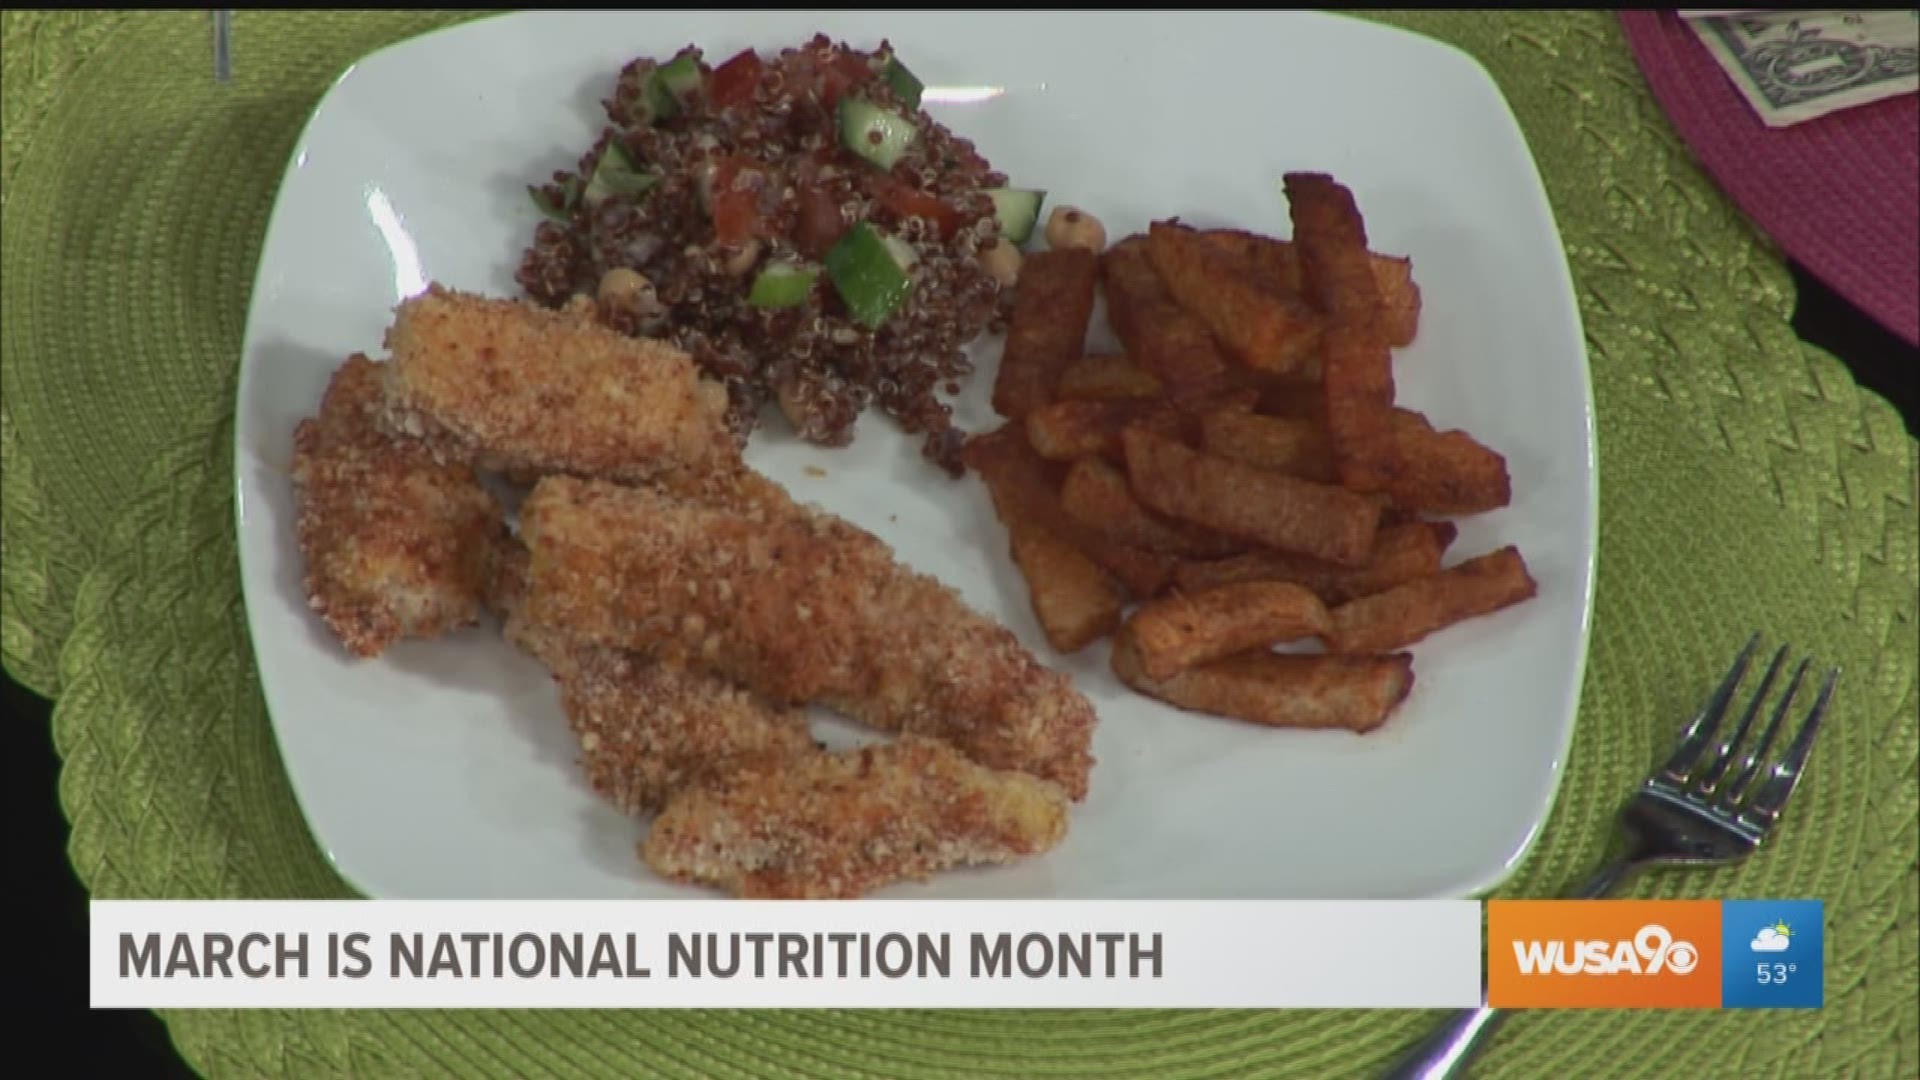 National nutrition month is an excellent time to discover the benefits of healthy eating and registered dietitian Marie Spano knows convenient ways to make healthy food taste good.